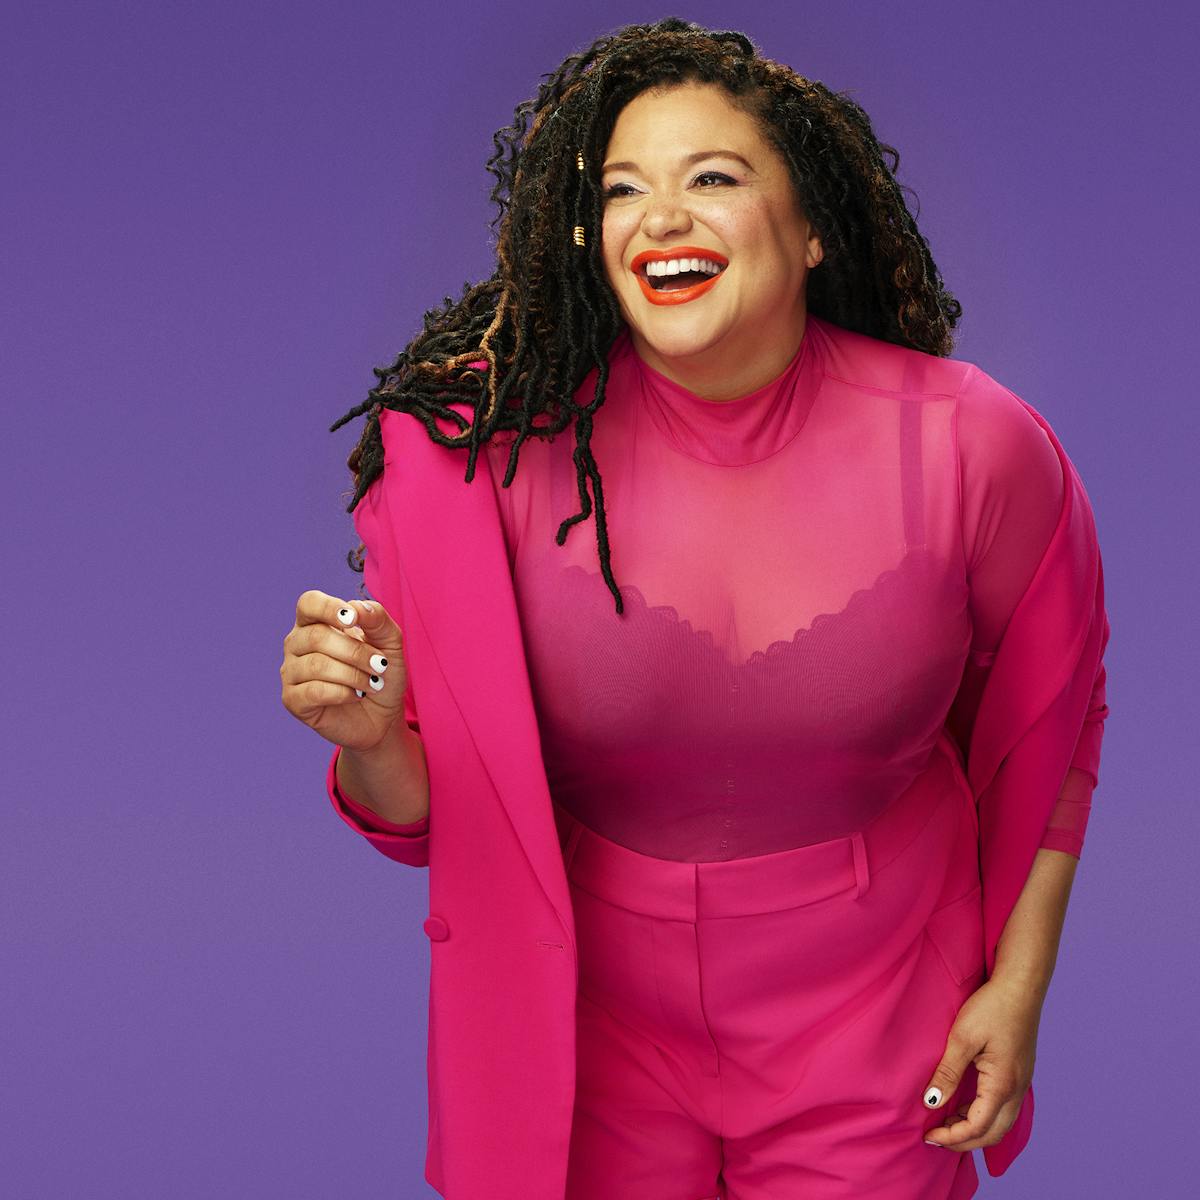 Michelle Buteau wears a pink top over a dark tank, pink shorts, and black heels, against a purple background.